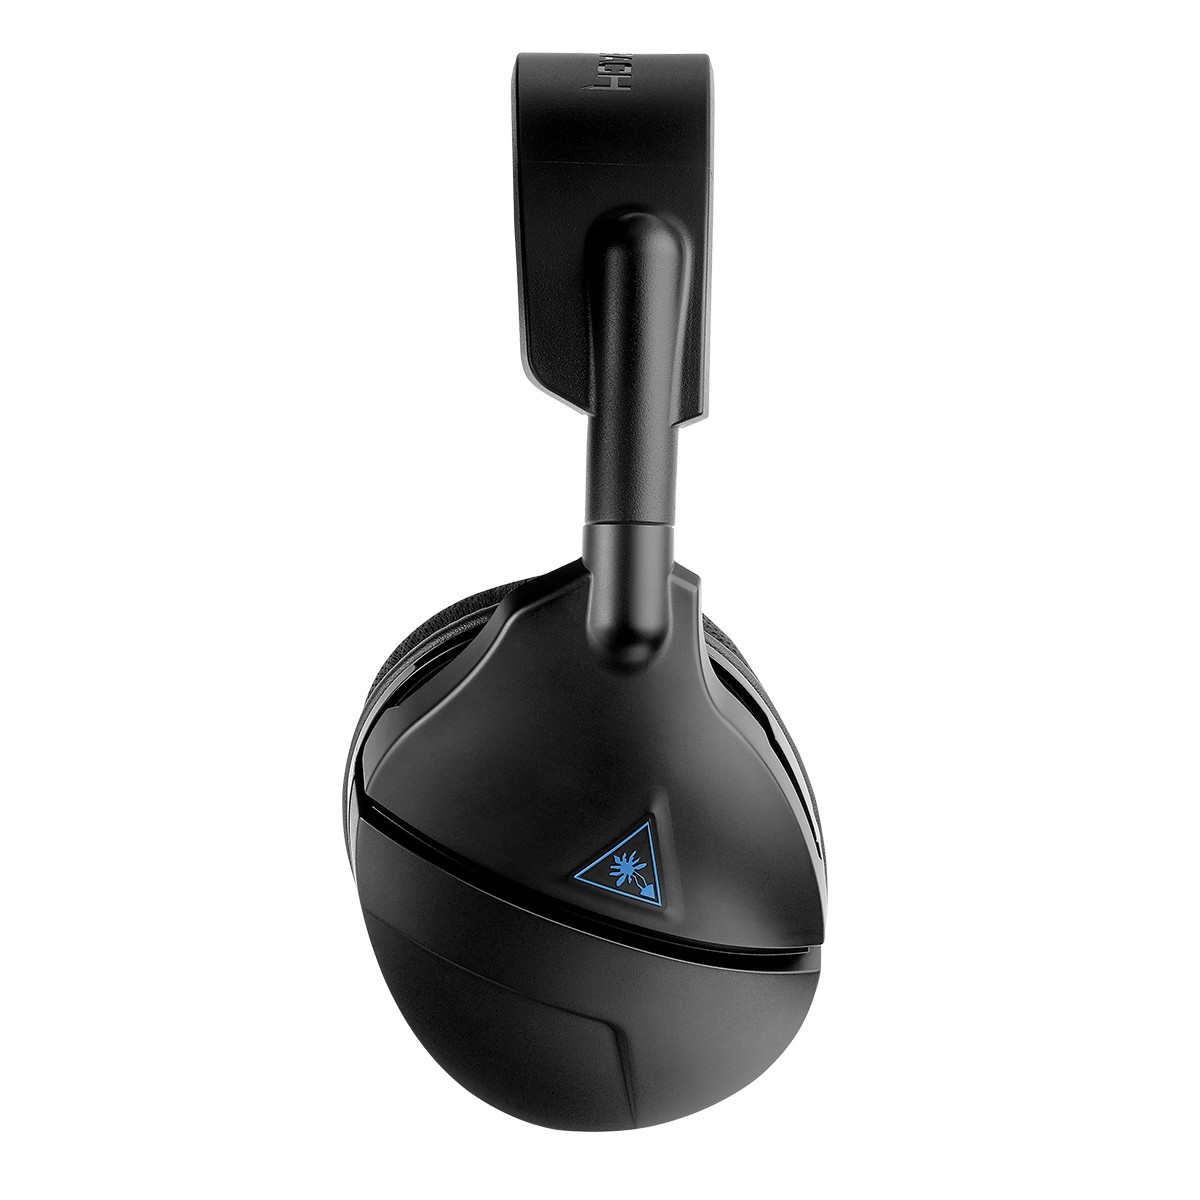 Turtle Beach Stealth 300 wired headset PS4/PC| 3.5mm